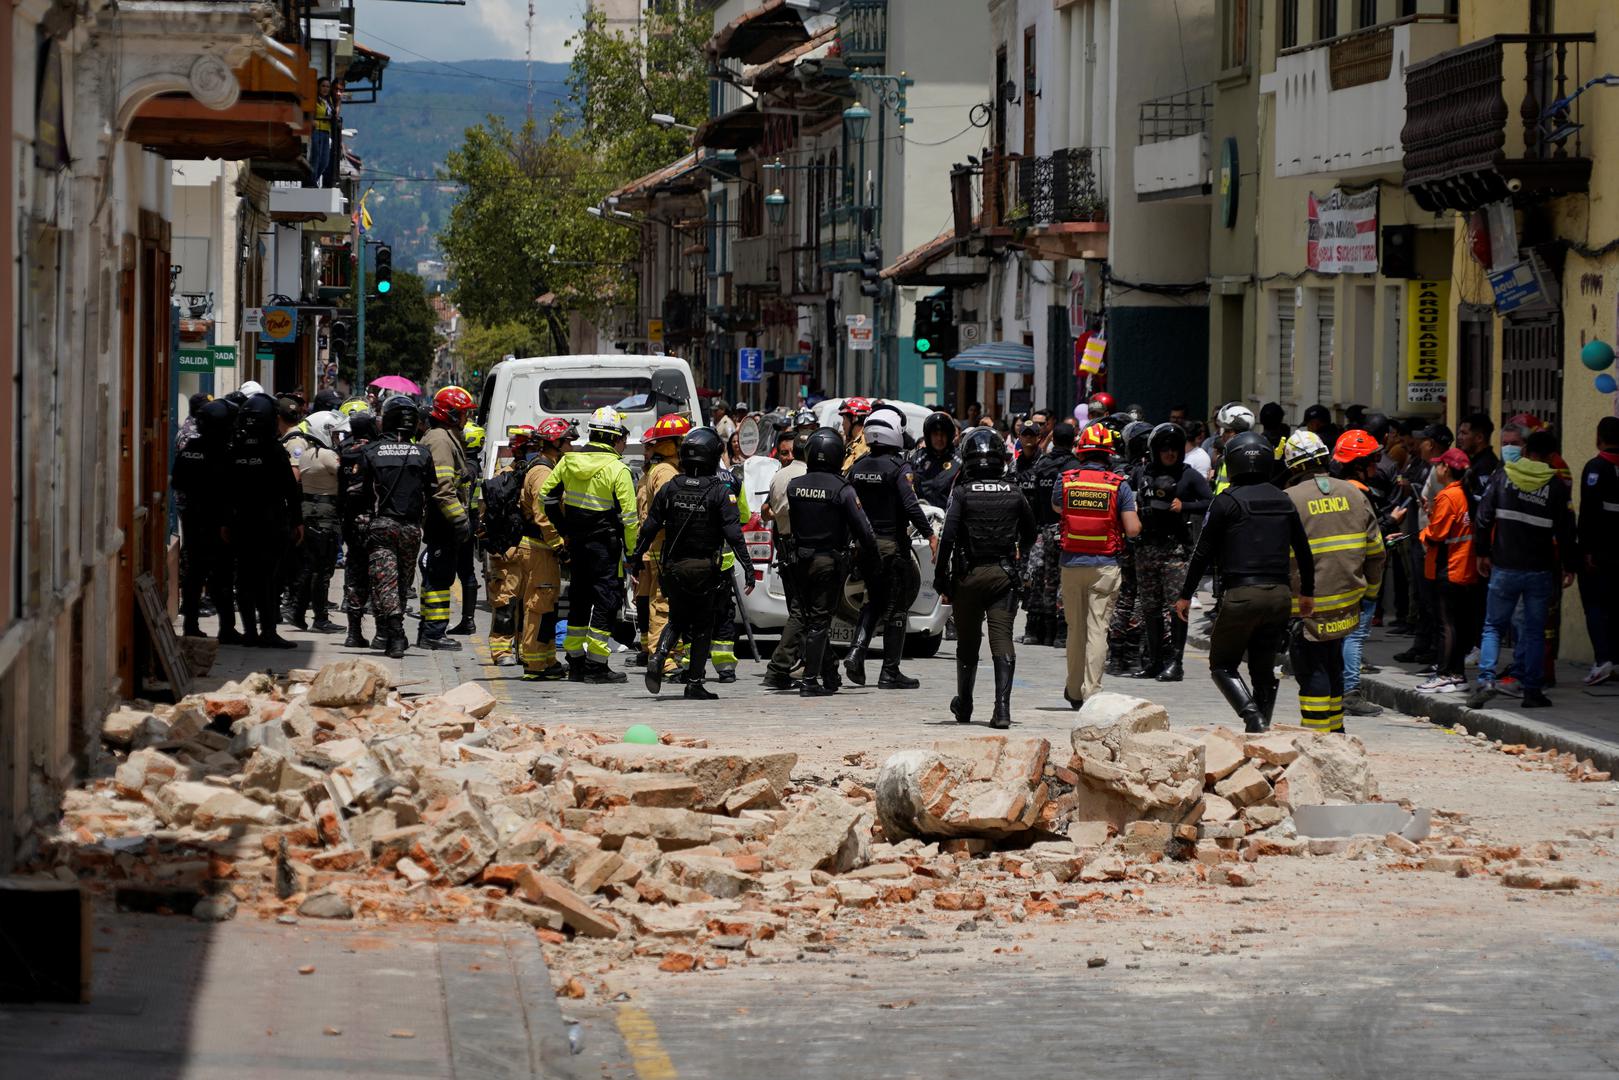 A damaged car and rubble from a house affected by the earthquake are pictured in Cuenca, Ecuador. March 18, 2023. REUTERS/Rafa Idrovo Espinoza NO RESALES. NO ARCHIVES Photo: Stringer/REUTERS